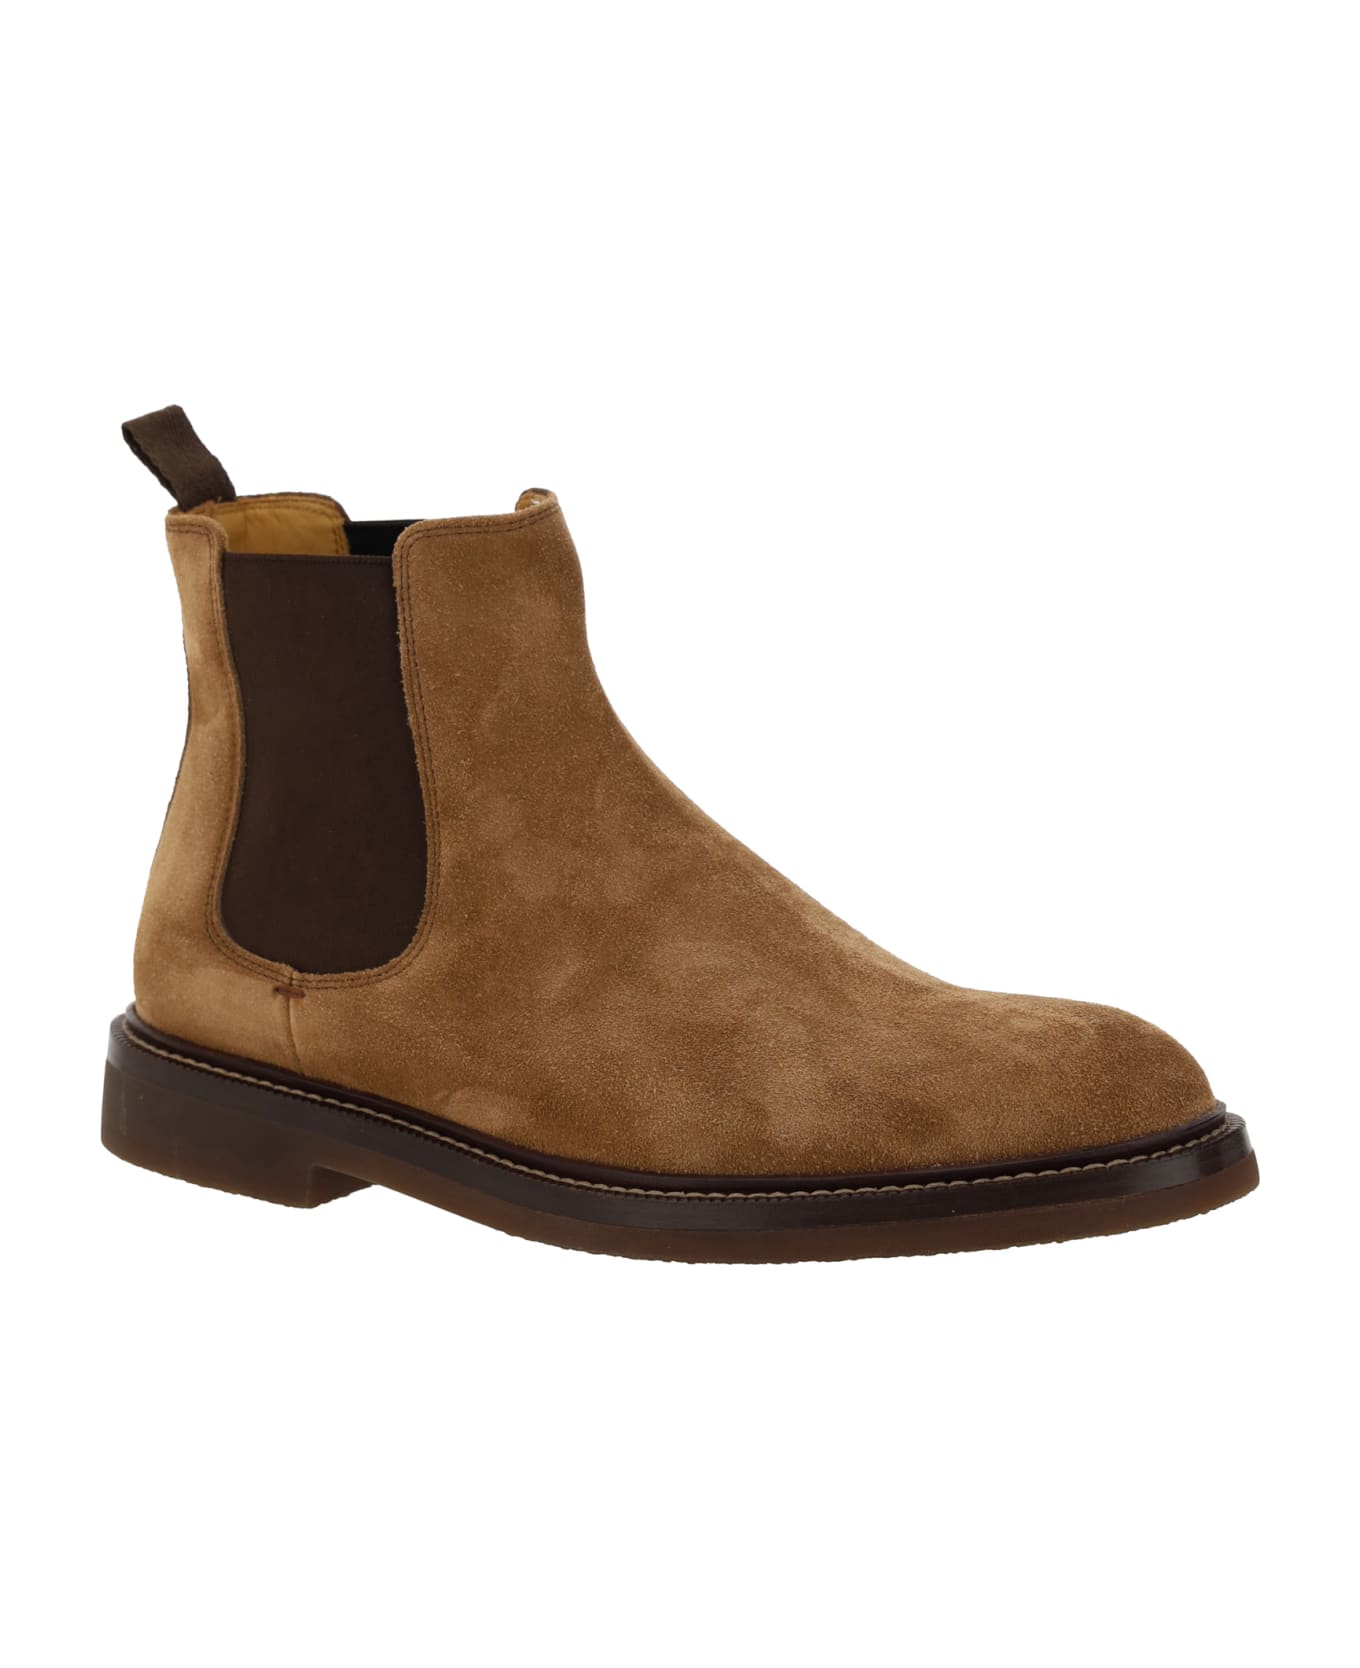 Brunello Cucinelli Ankle Boots - C8831 ブーツ